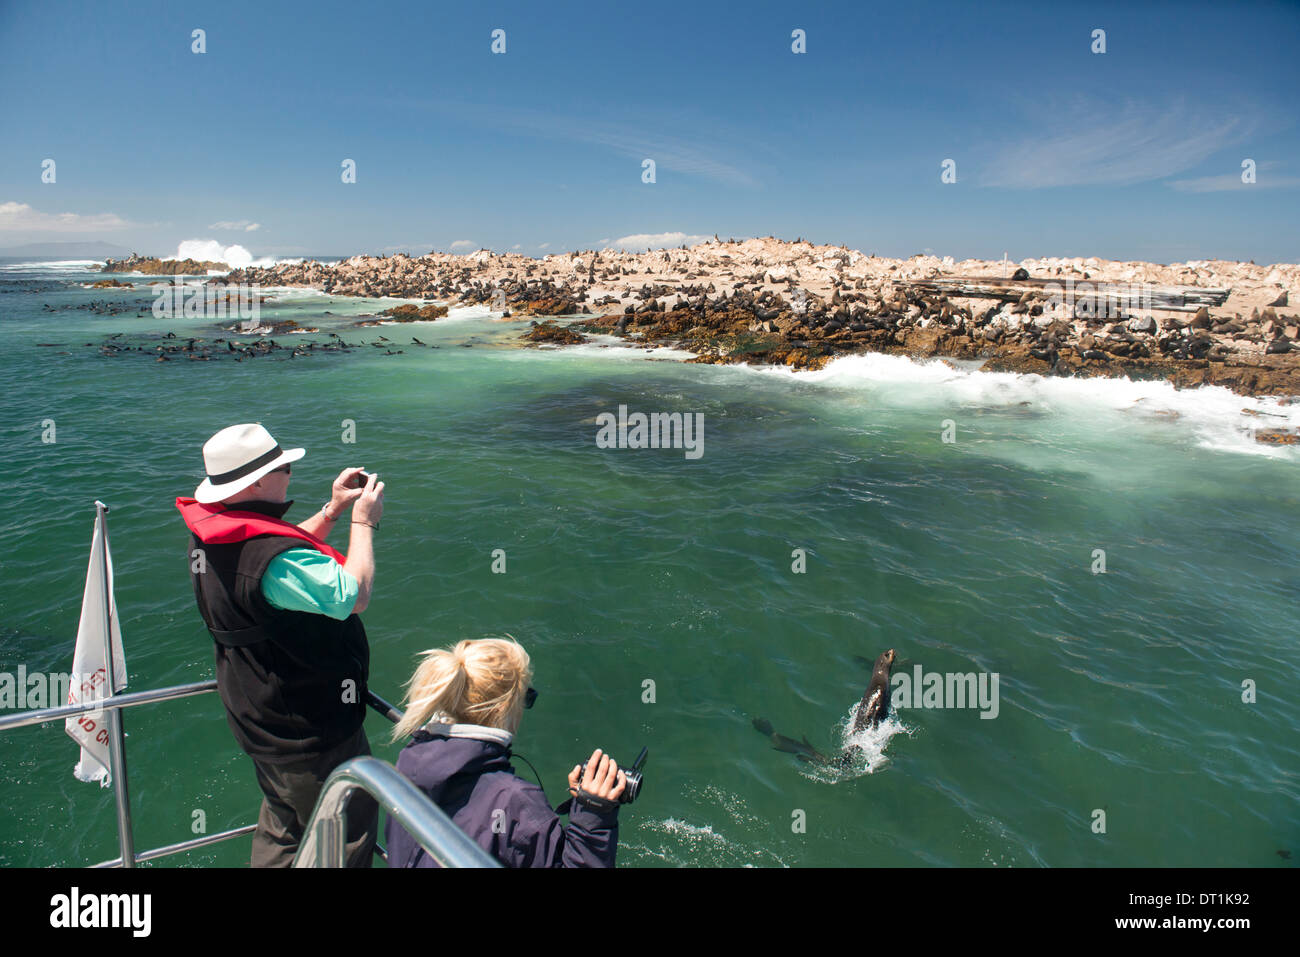 Tourists photographing a fur seal (Arctocephalus pusillus) jumping out of the water, Gansbaai, Western Cape, South Africa Stock Photo